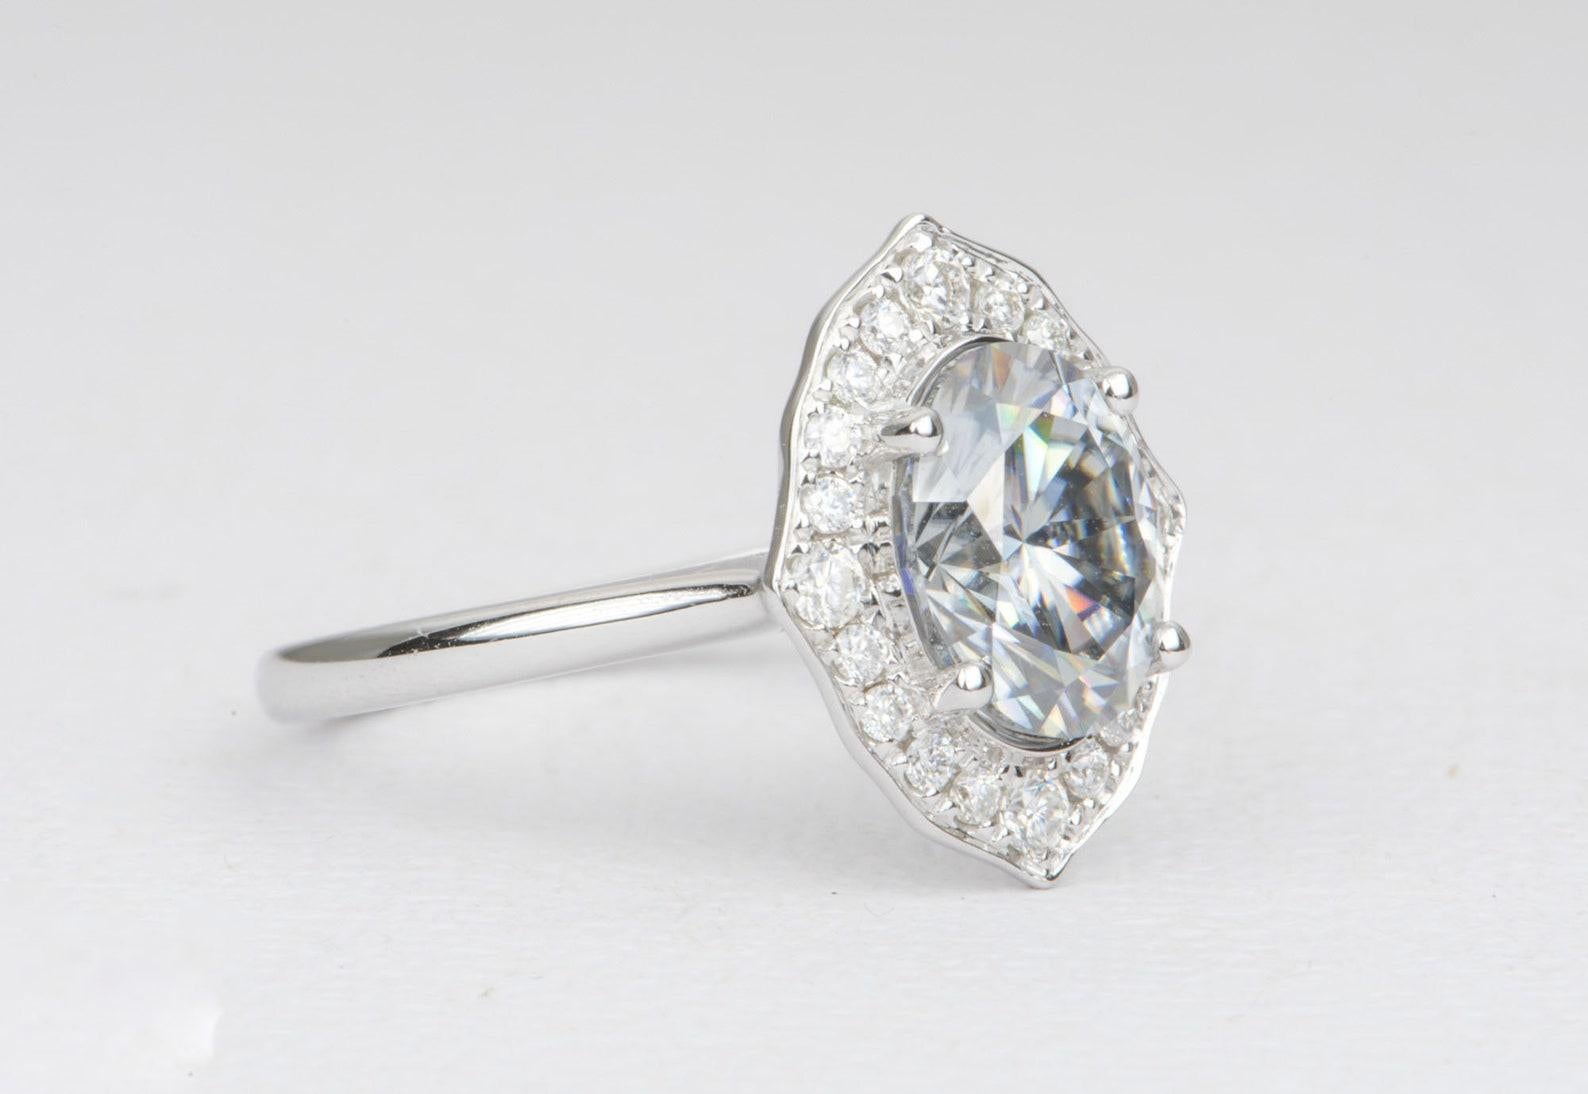 â™¥ This ring features a 2.15ct oval-shaped gray moissanite in the center, with a beautiful sparkly white moissanite halo in a feminine floral style
â™¥ Solid 14K white gold
â™¥ The center moissanite is of a really beautiful silver gray color and